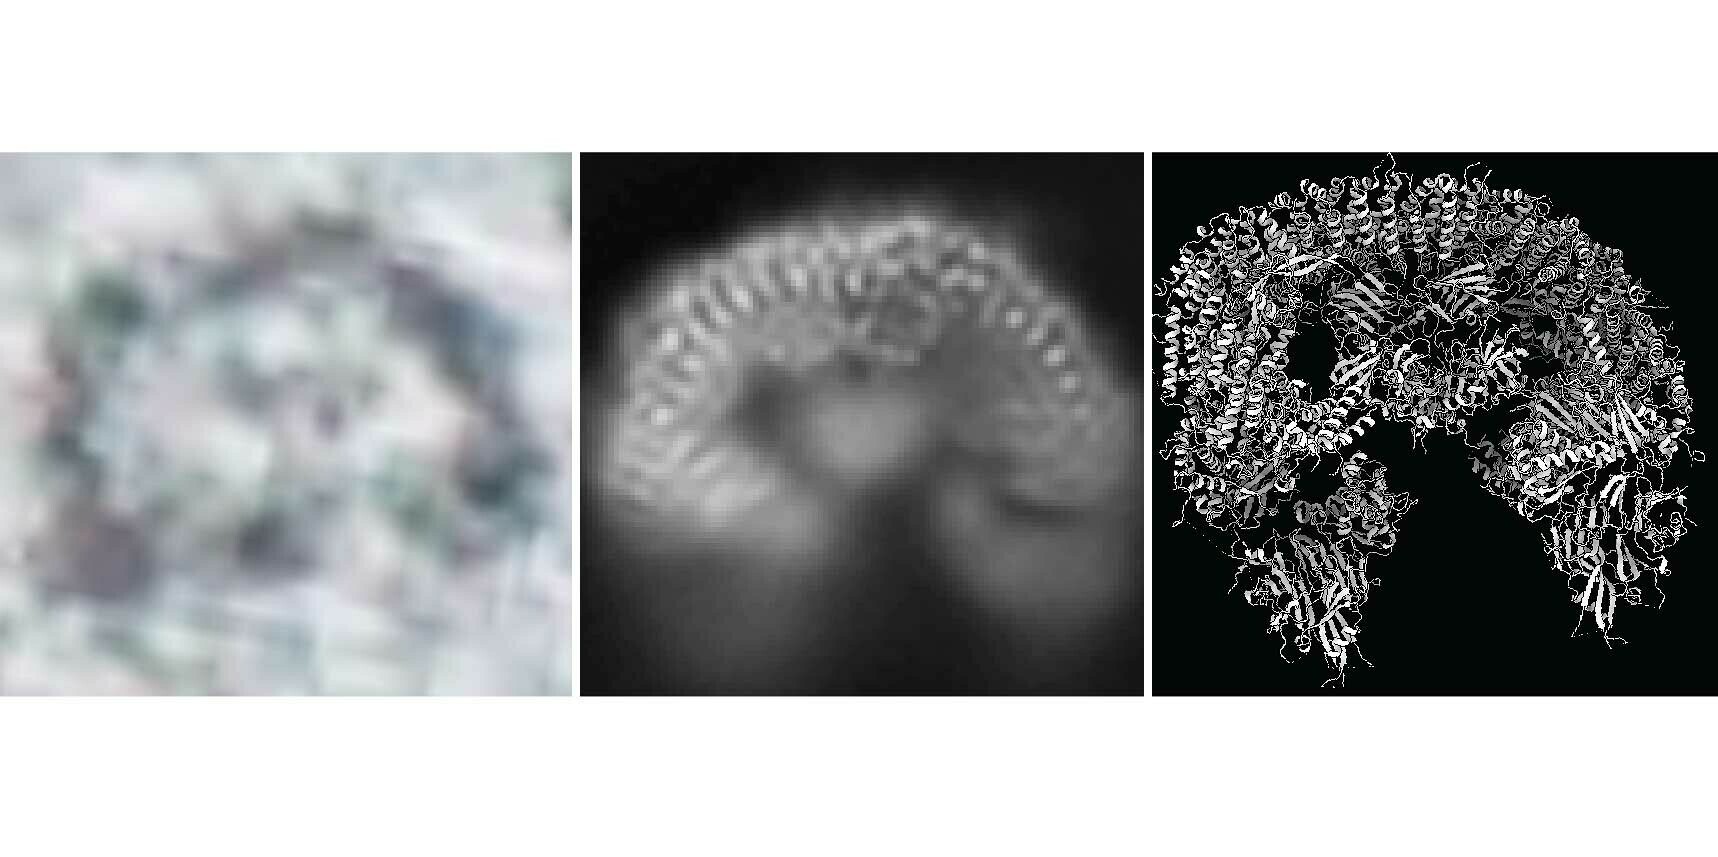 A cryo-EM study of BIRC6 taking shape: almost two million input particle images (left) were processed to create 2D averages (center), leading to a 3D model (right).